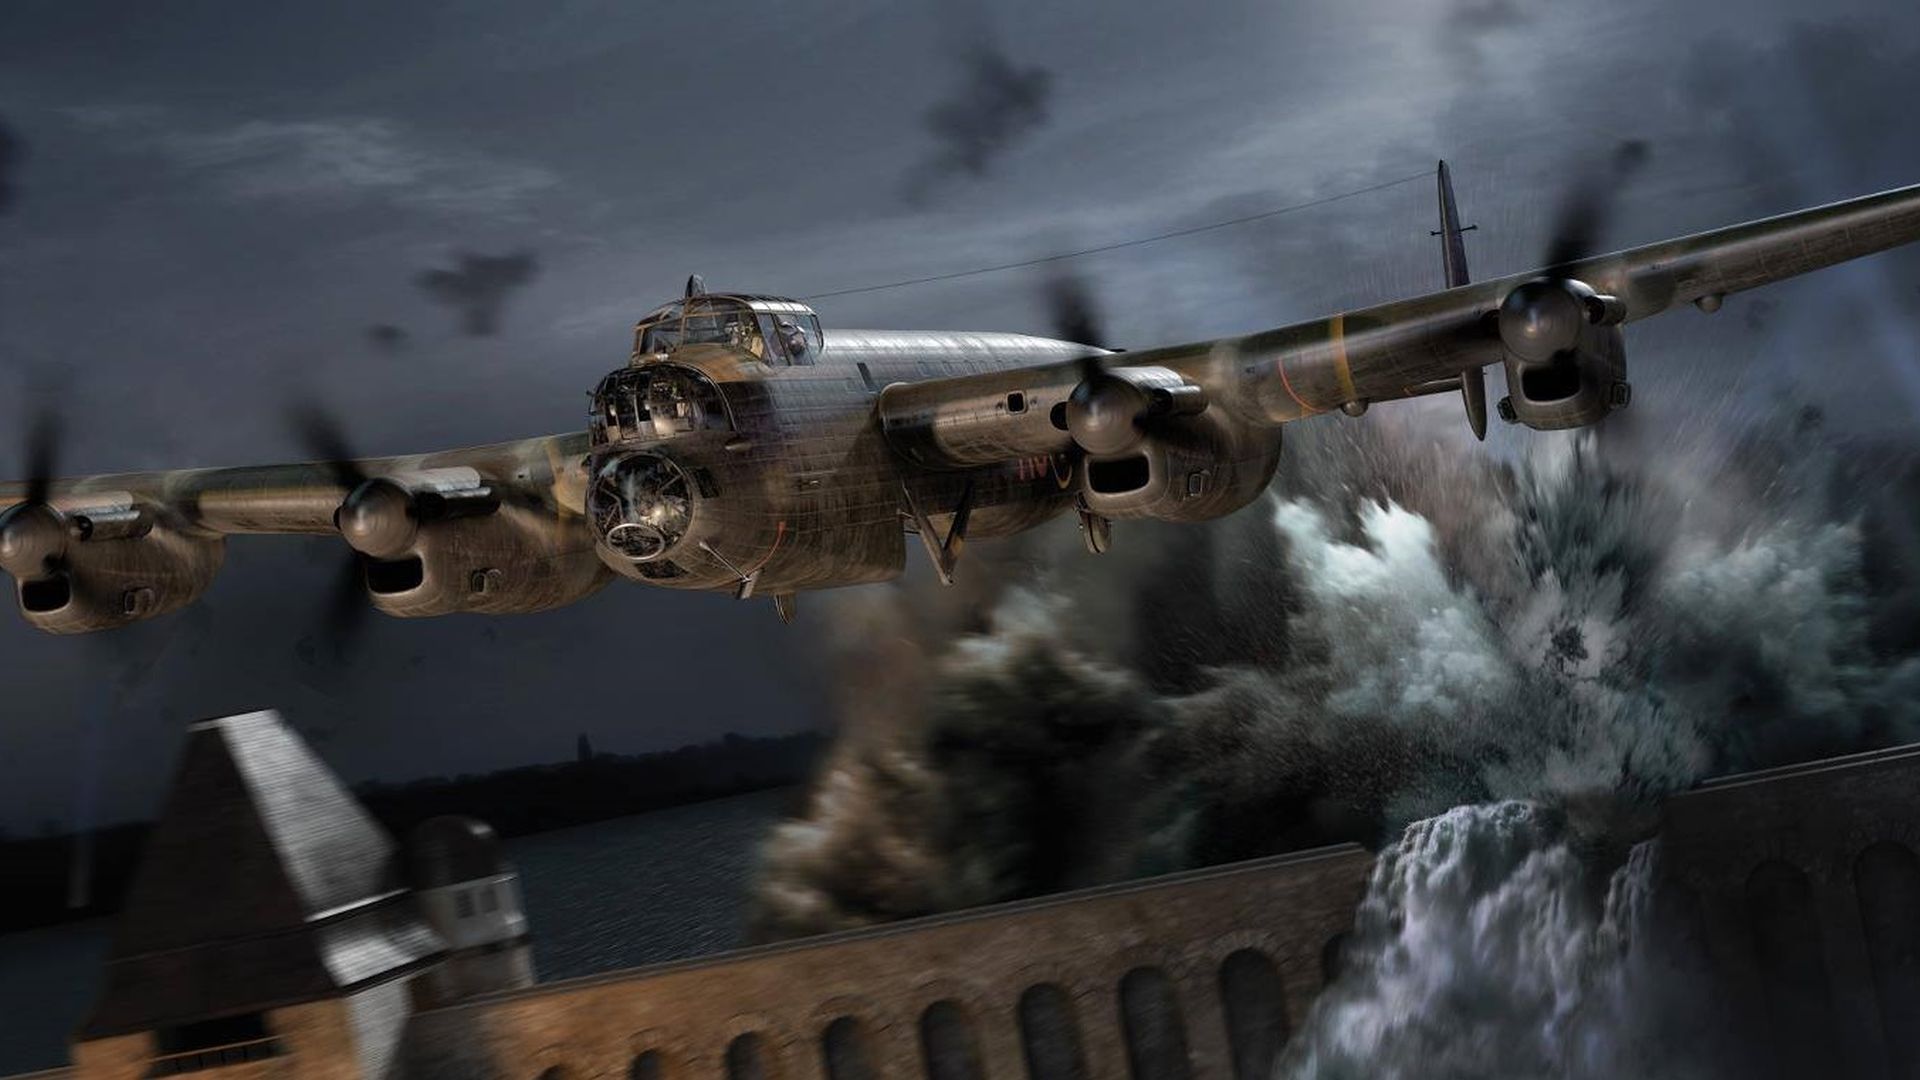 The Dam Busters background